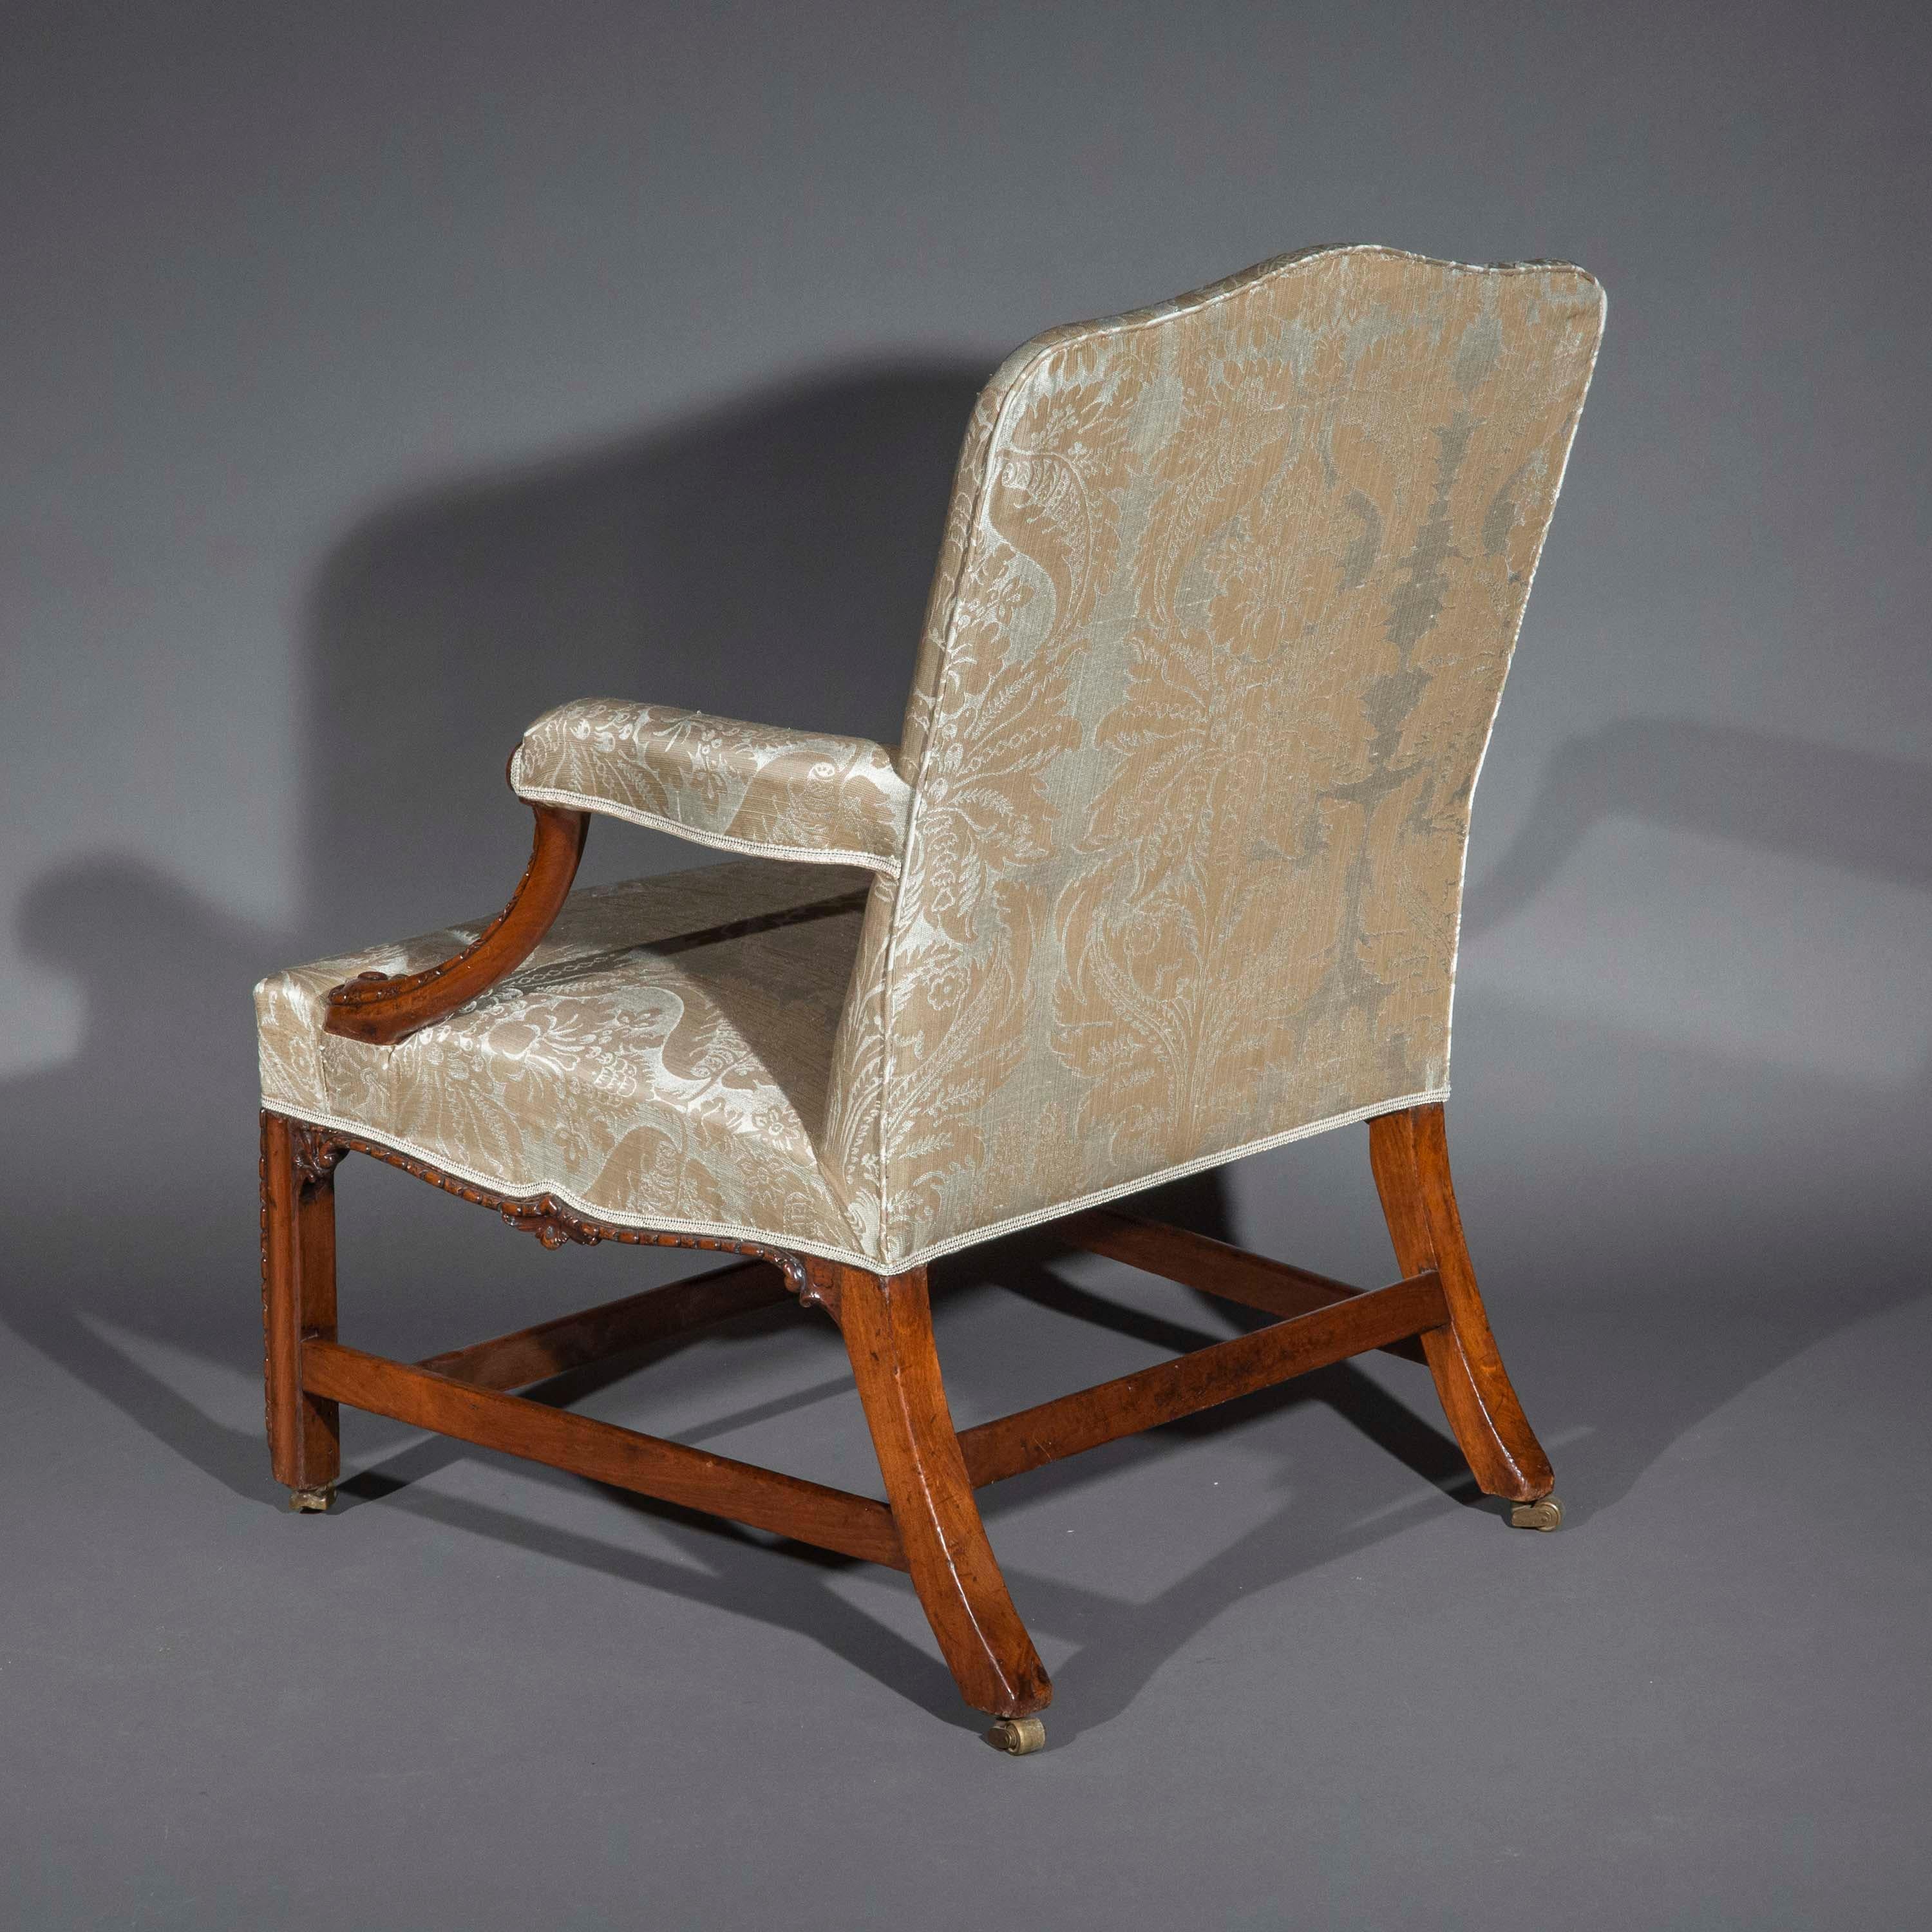 Large English Chippendale Gainsborough Armchair, mid-18th Century For Sale 10